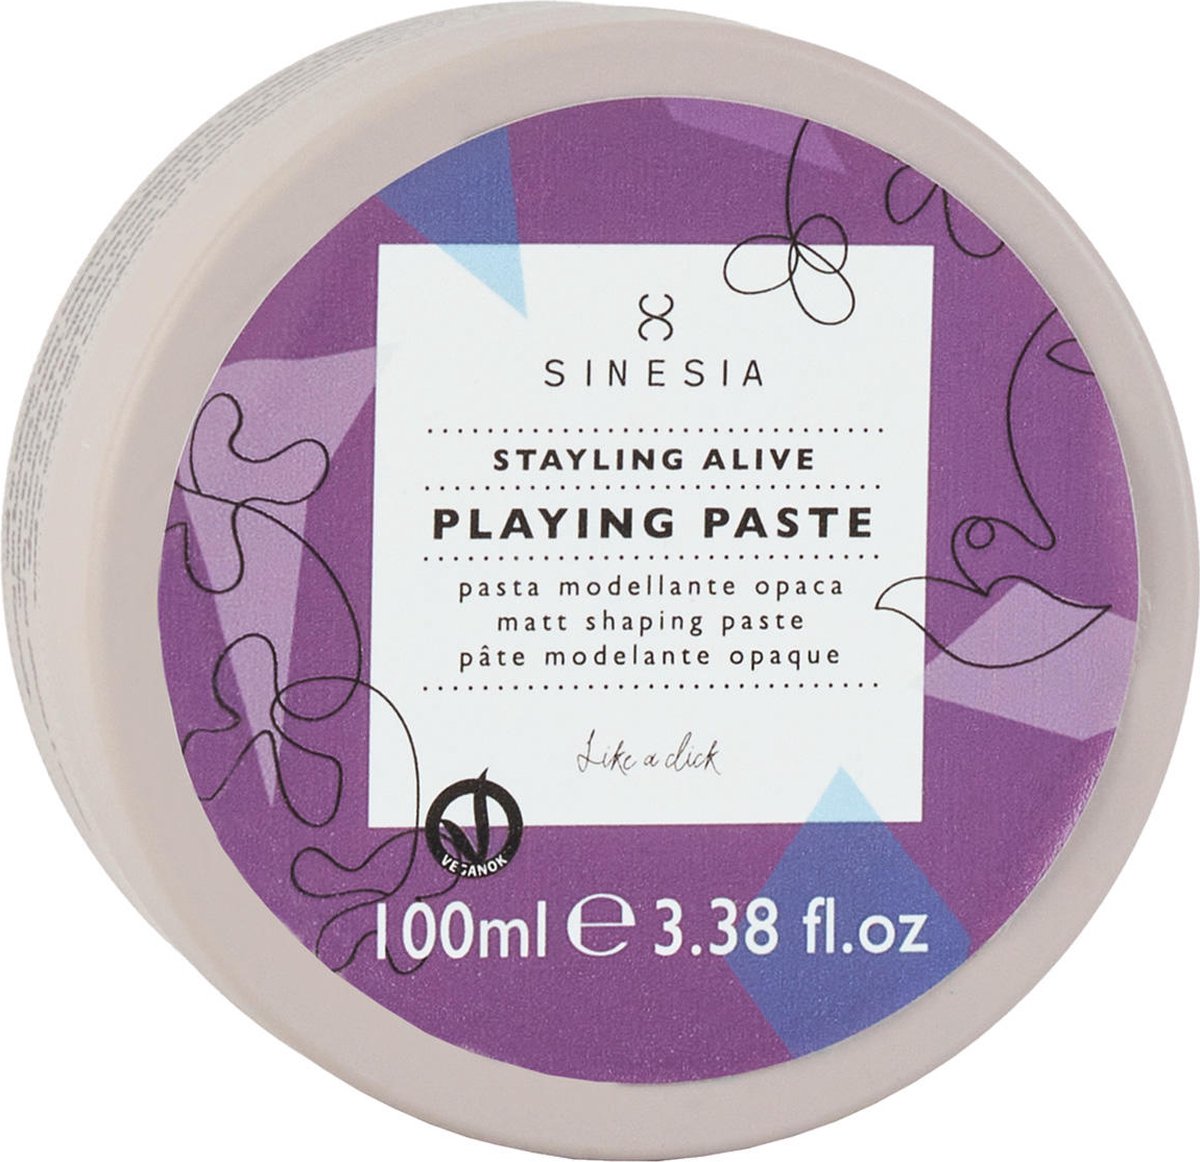 Sinesia Styling Alive Playing Paste 100 ml